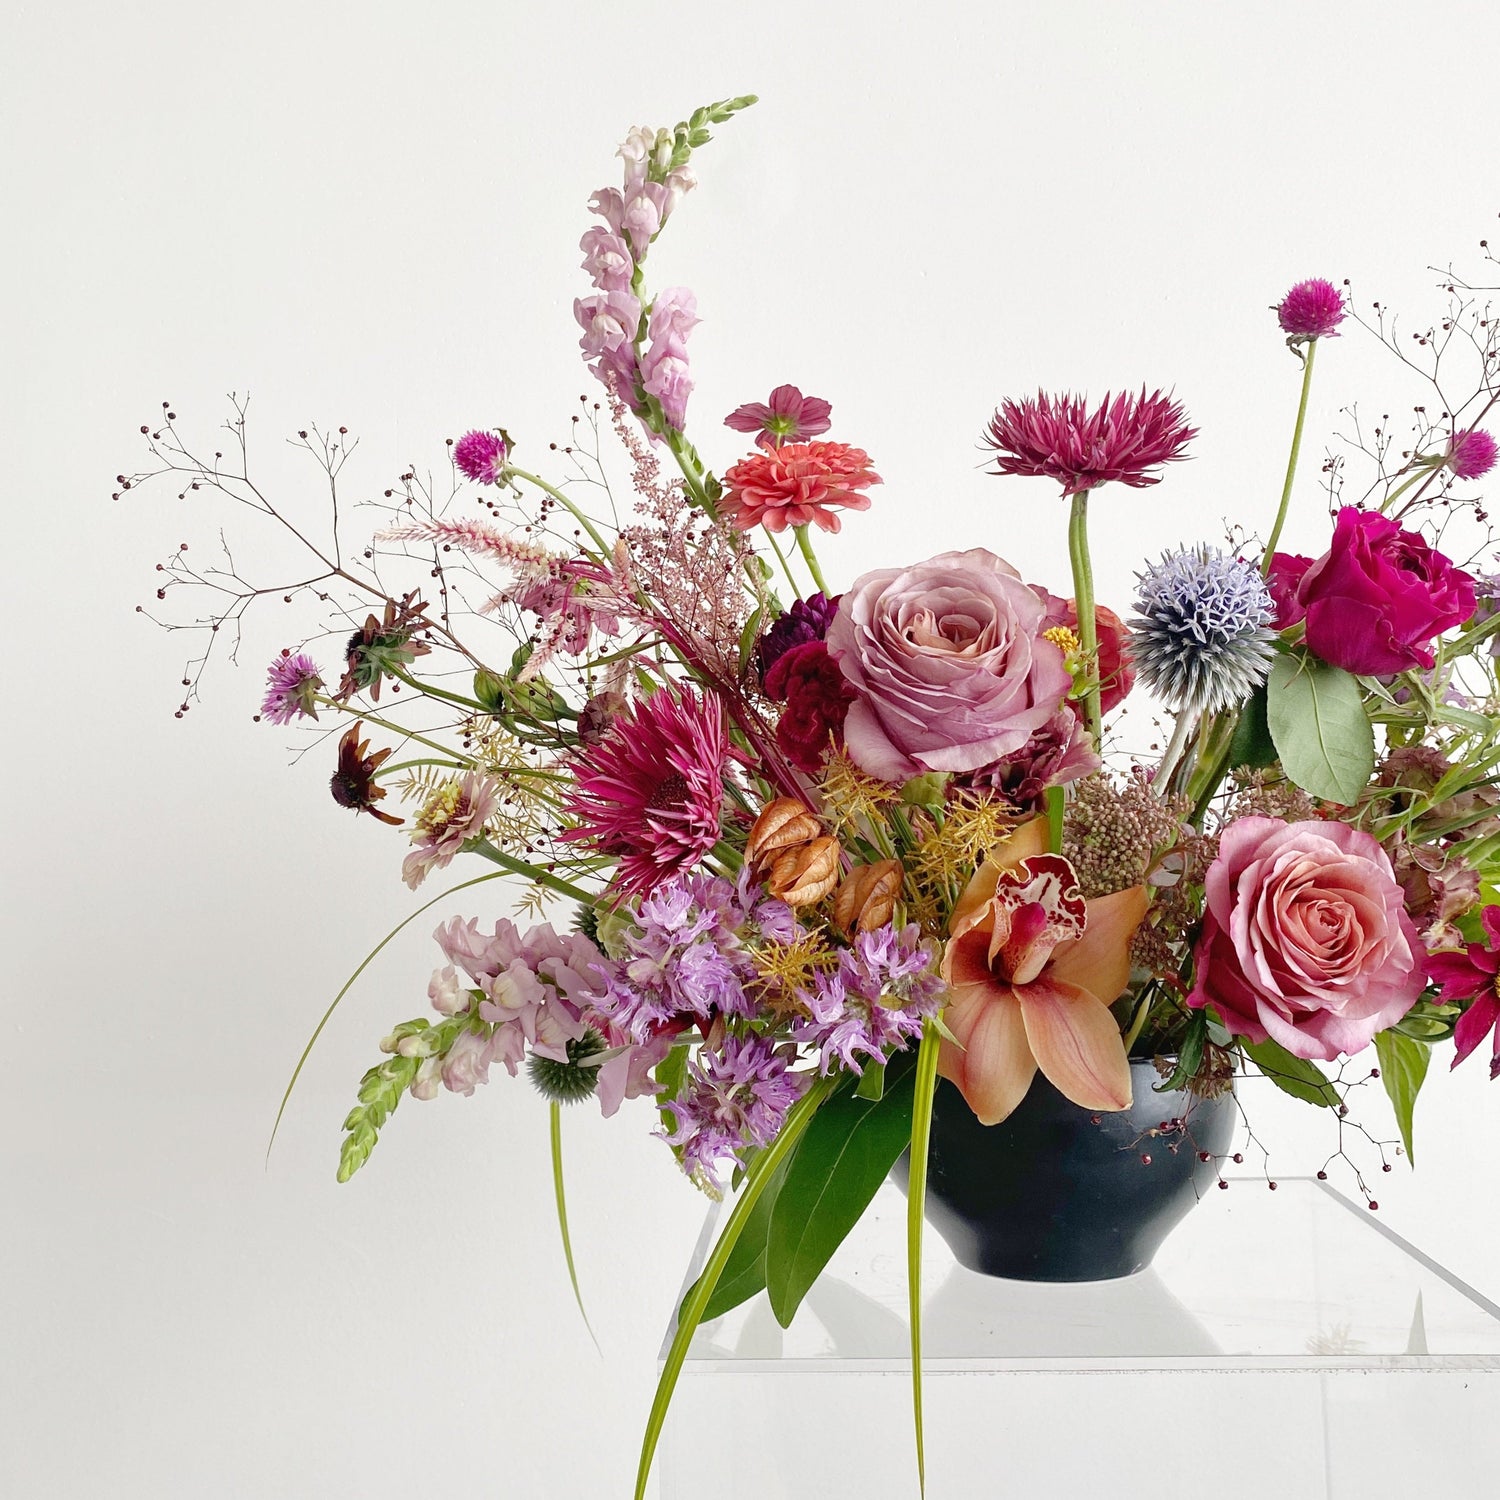 Bring a touch of Memphis style to your home or office with this beautiful seasonal floral arrangement from Everbloom Design. Our talented florists create stunning works of art like this every day.